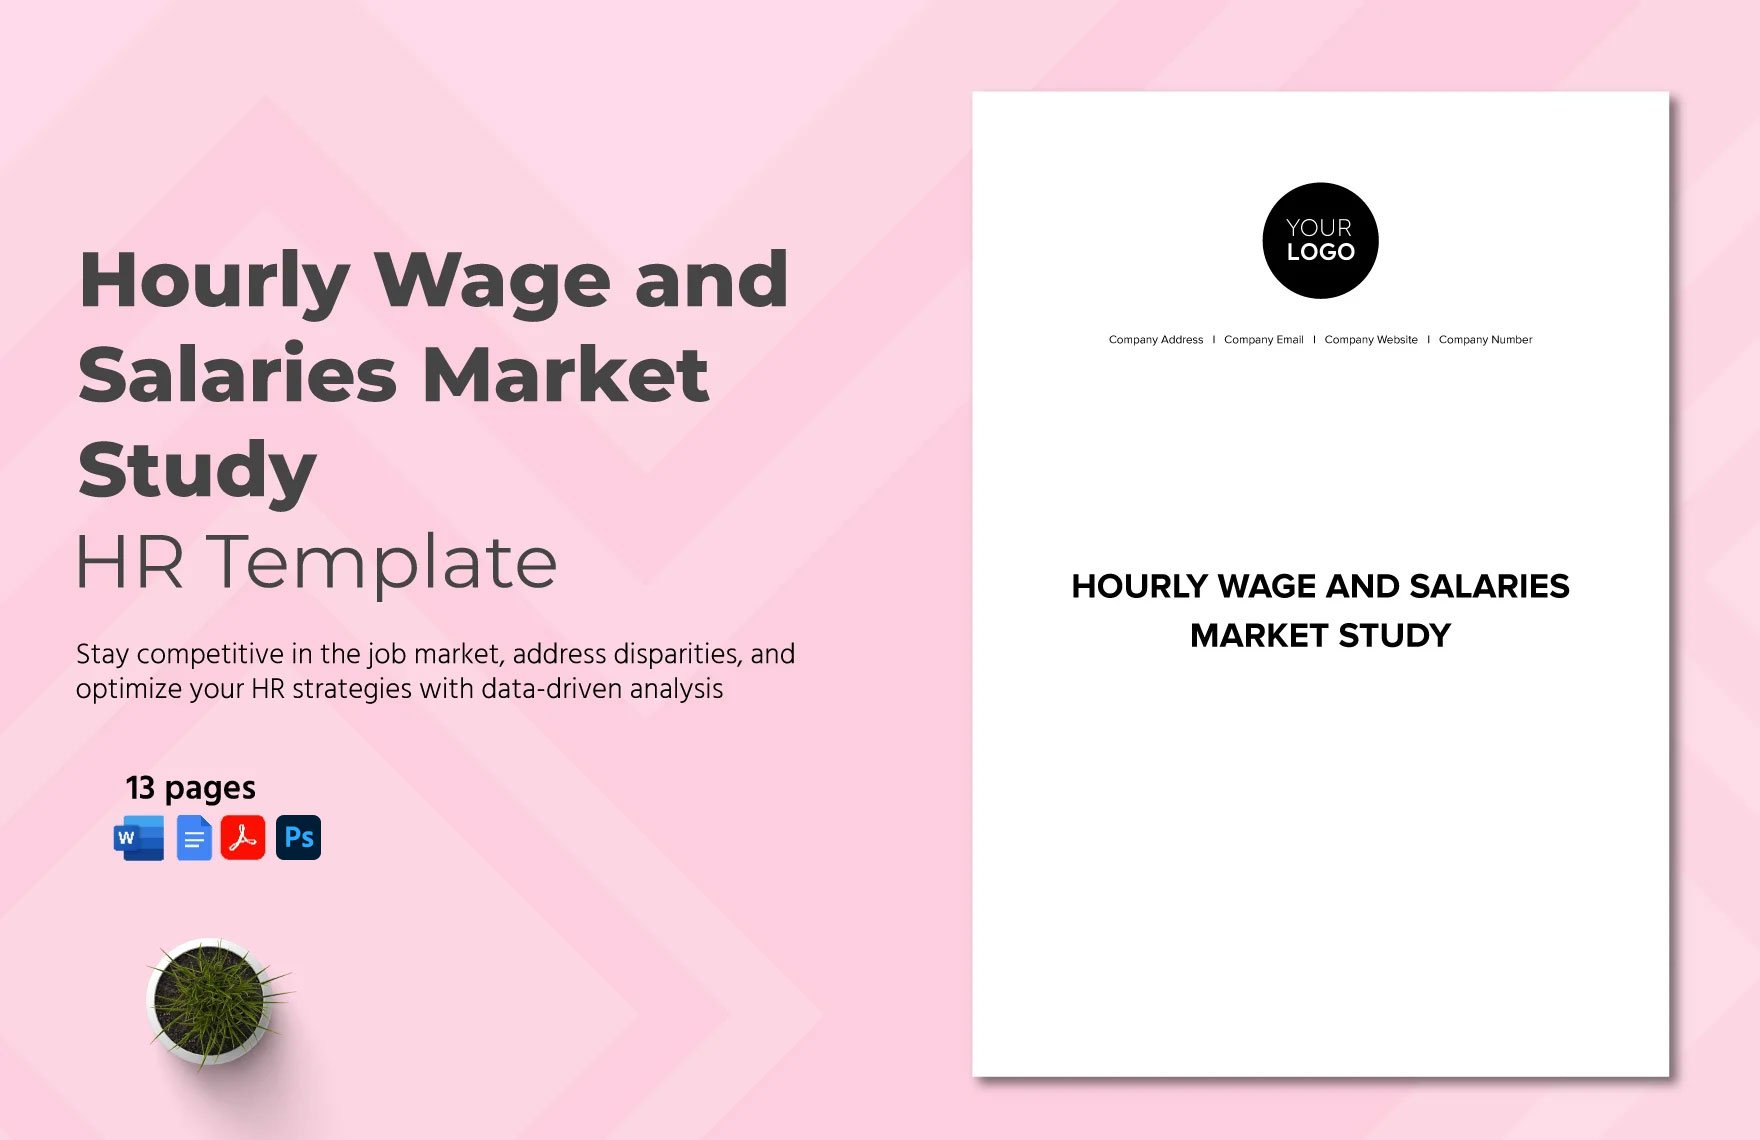 Hourly Wage and Salaries Market Study HR Template